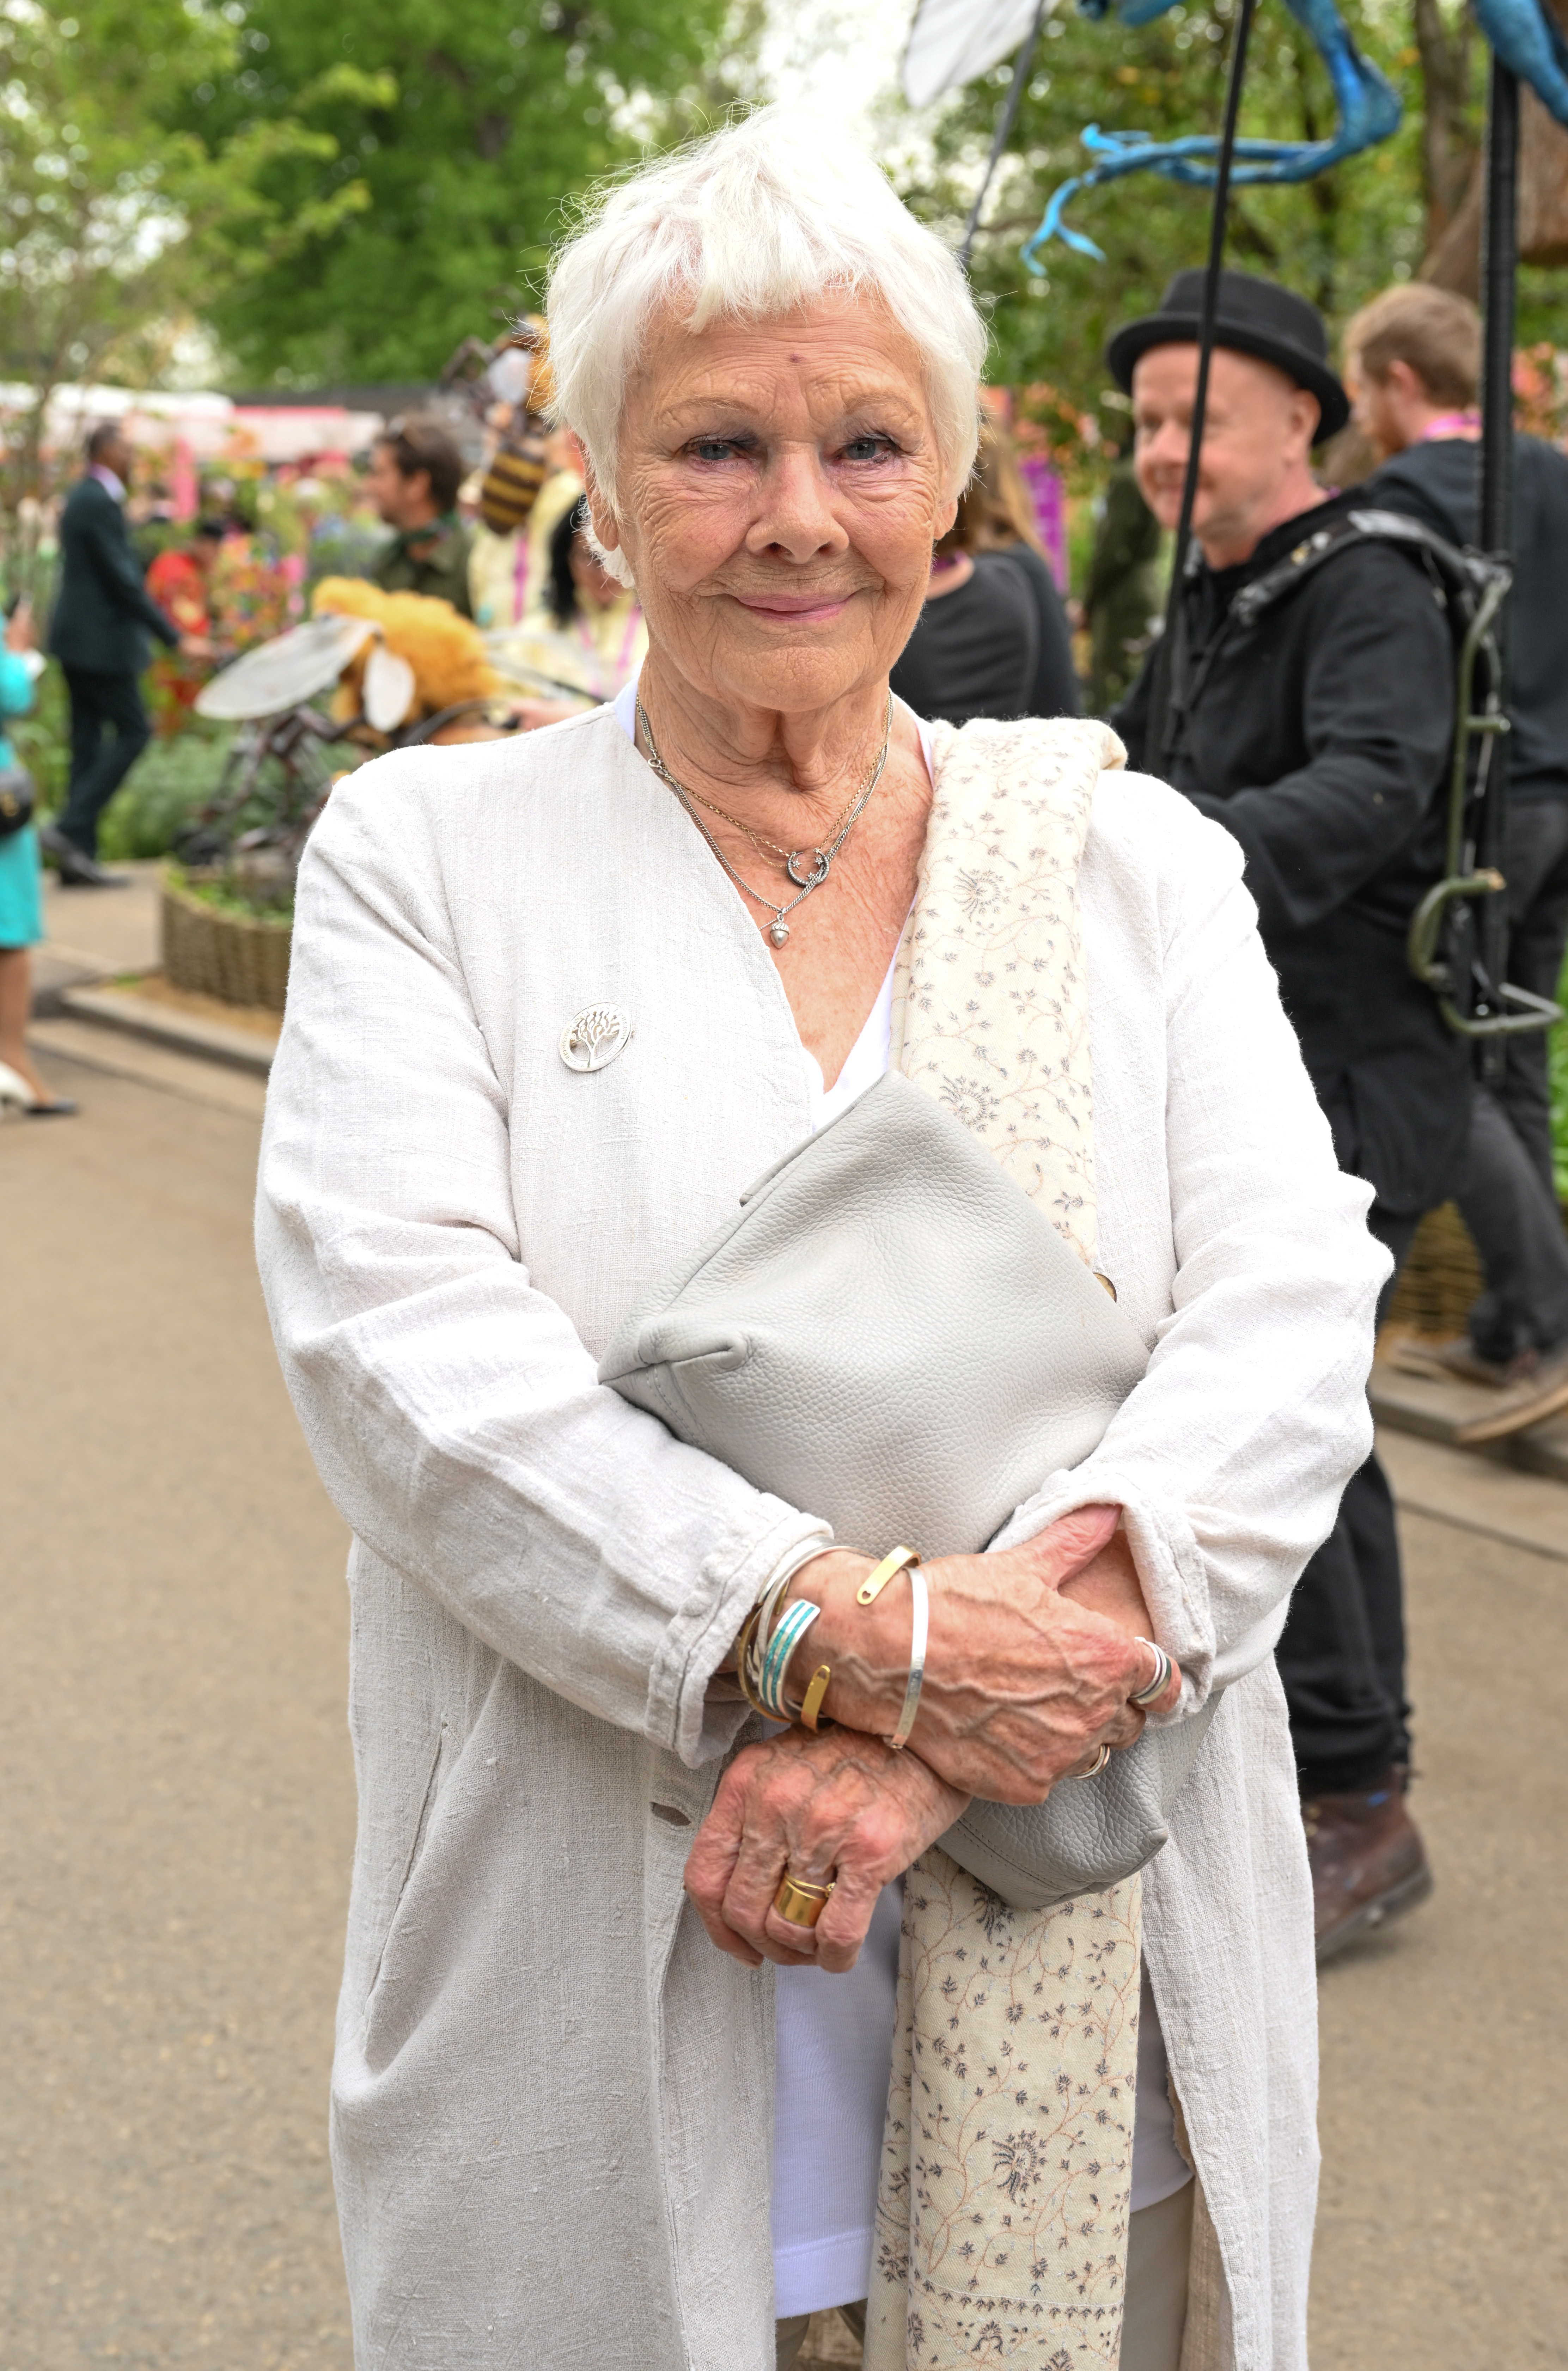 Dame Judy Dench attends the Chelsea Flower Show at Royal Hospital Chelsea in London, England on May 22, 2023. | Source: Getty Images